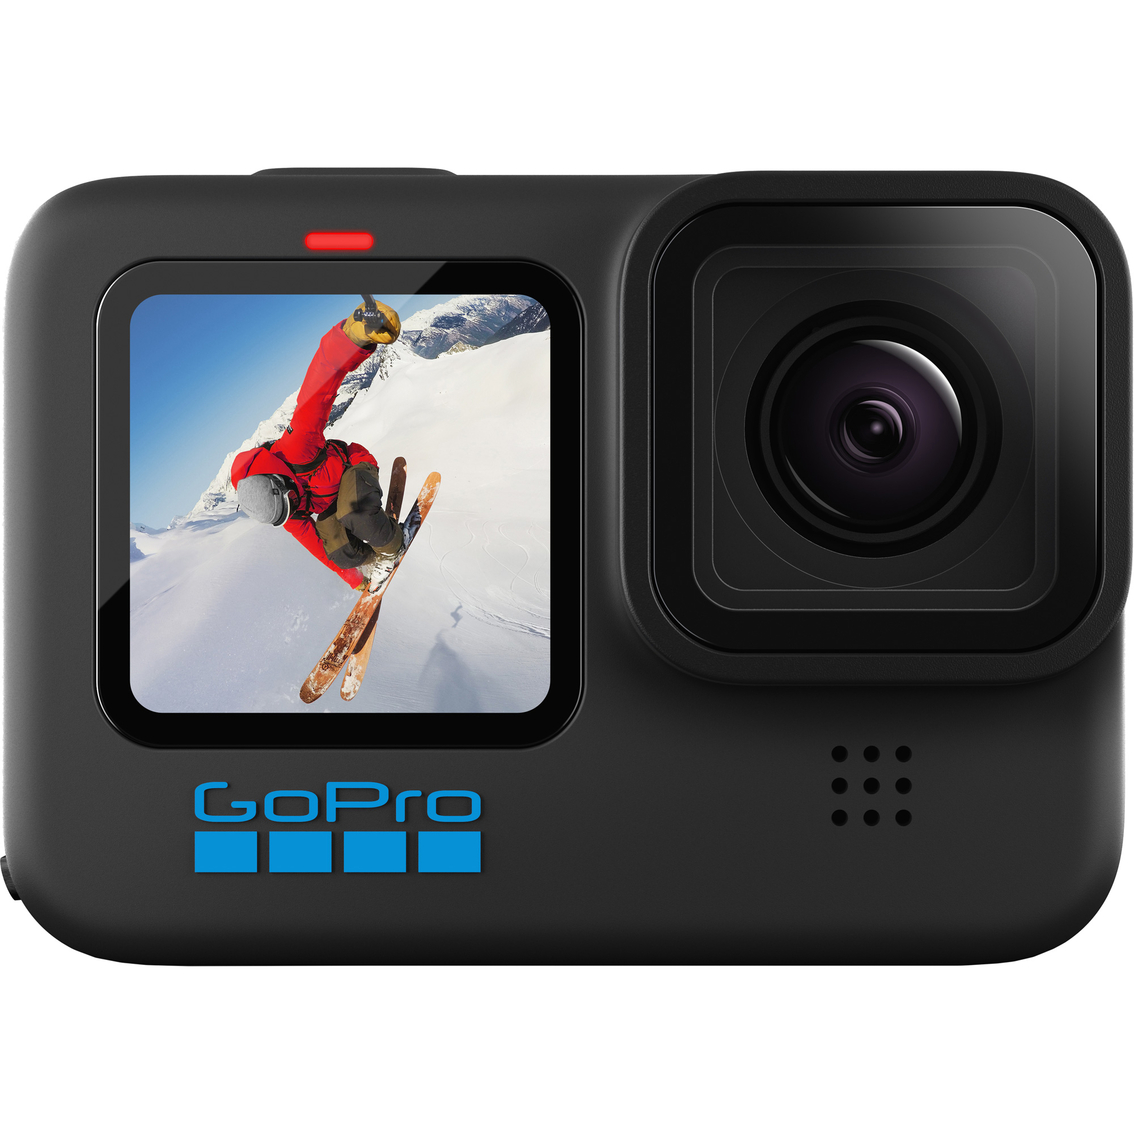 A GoPro Hero 12 Black bundle with accessories is $100 off for Black Friday